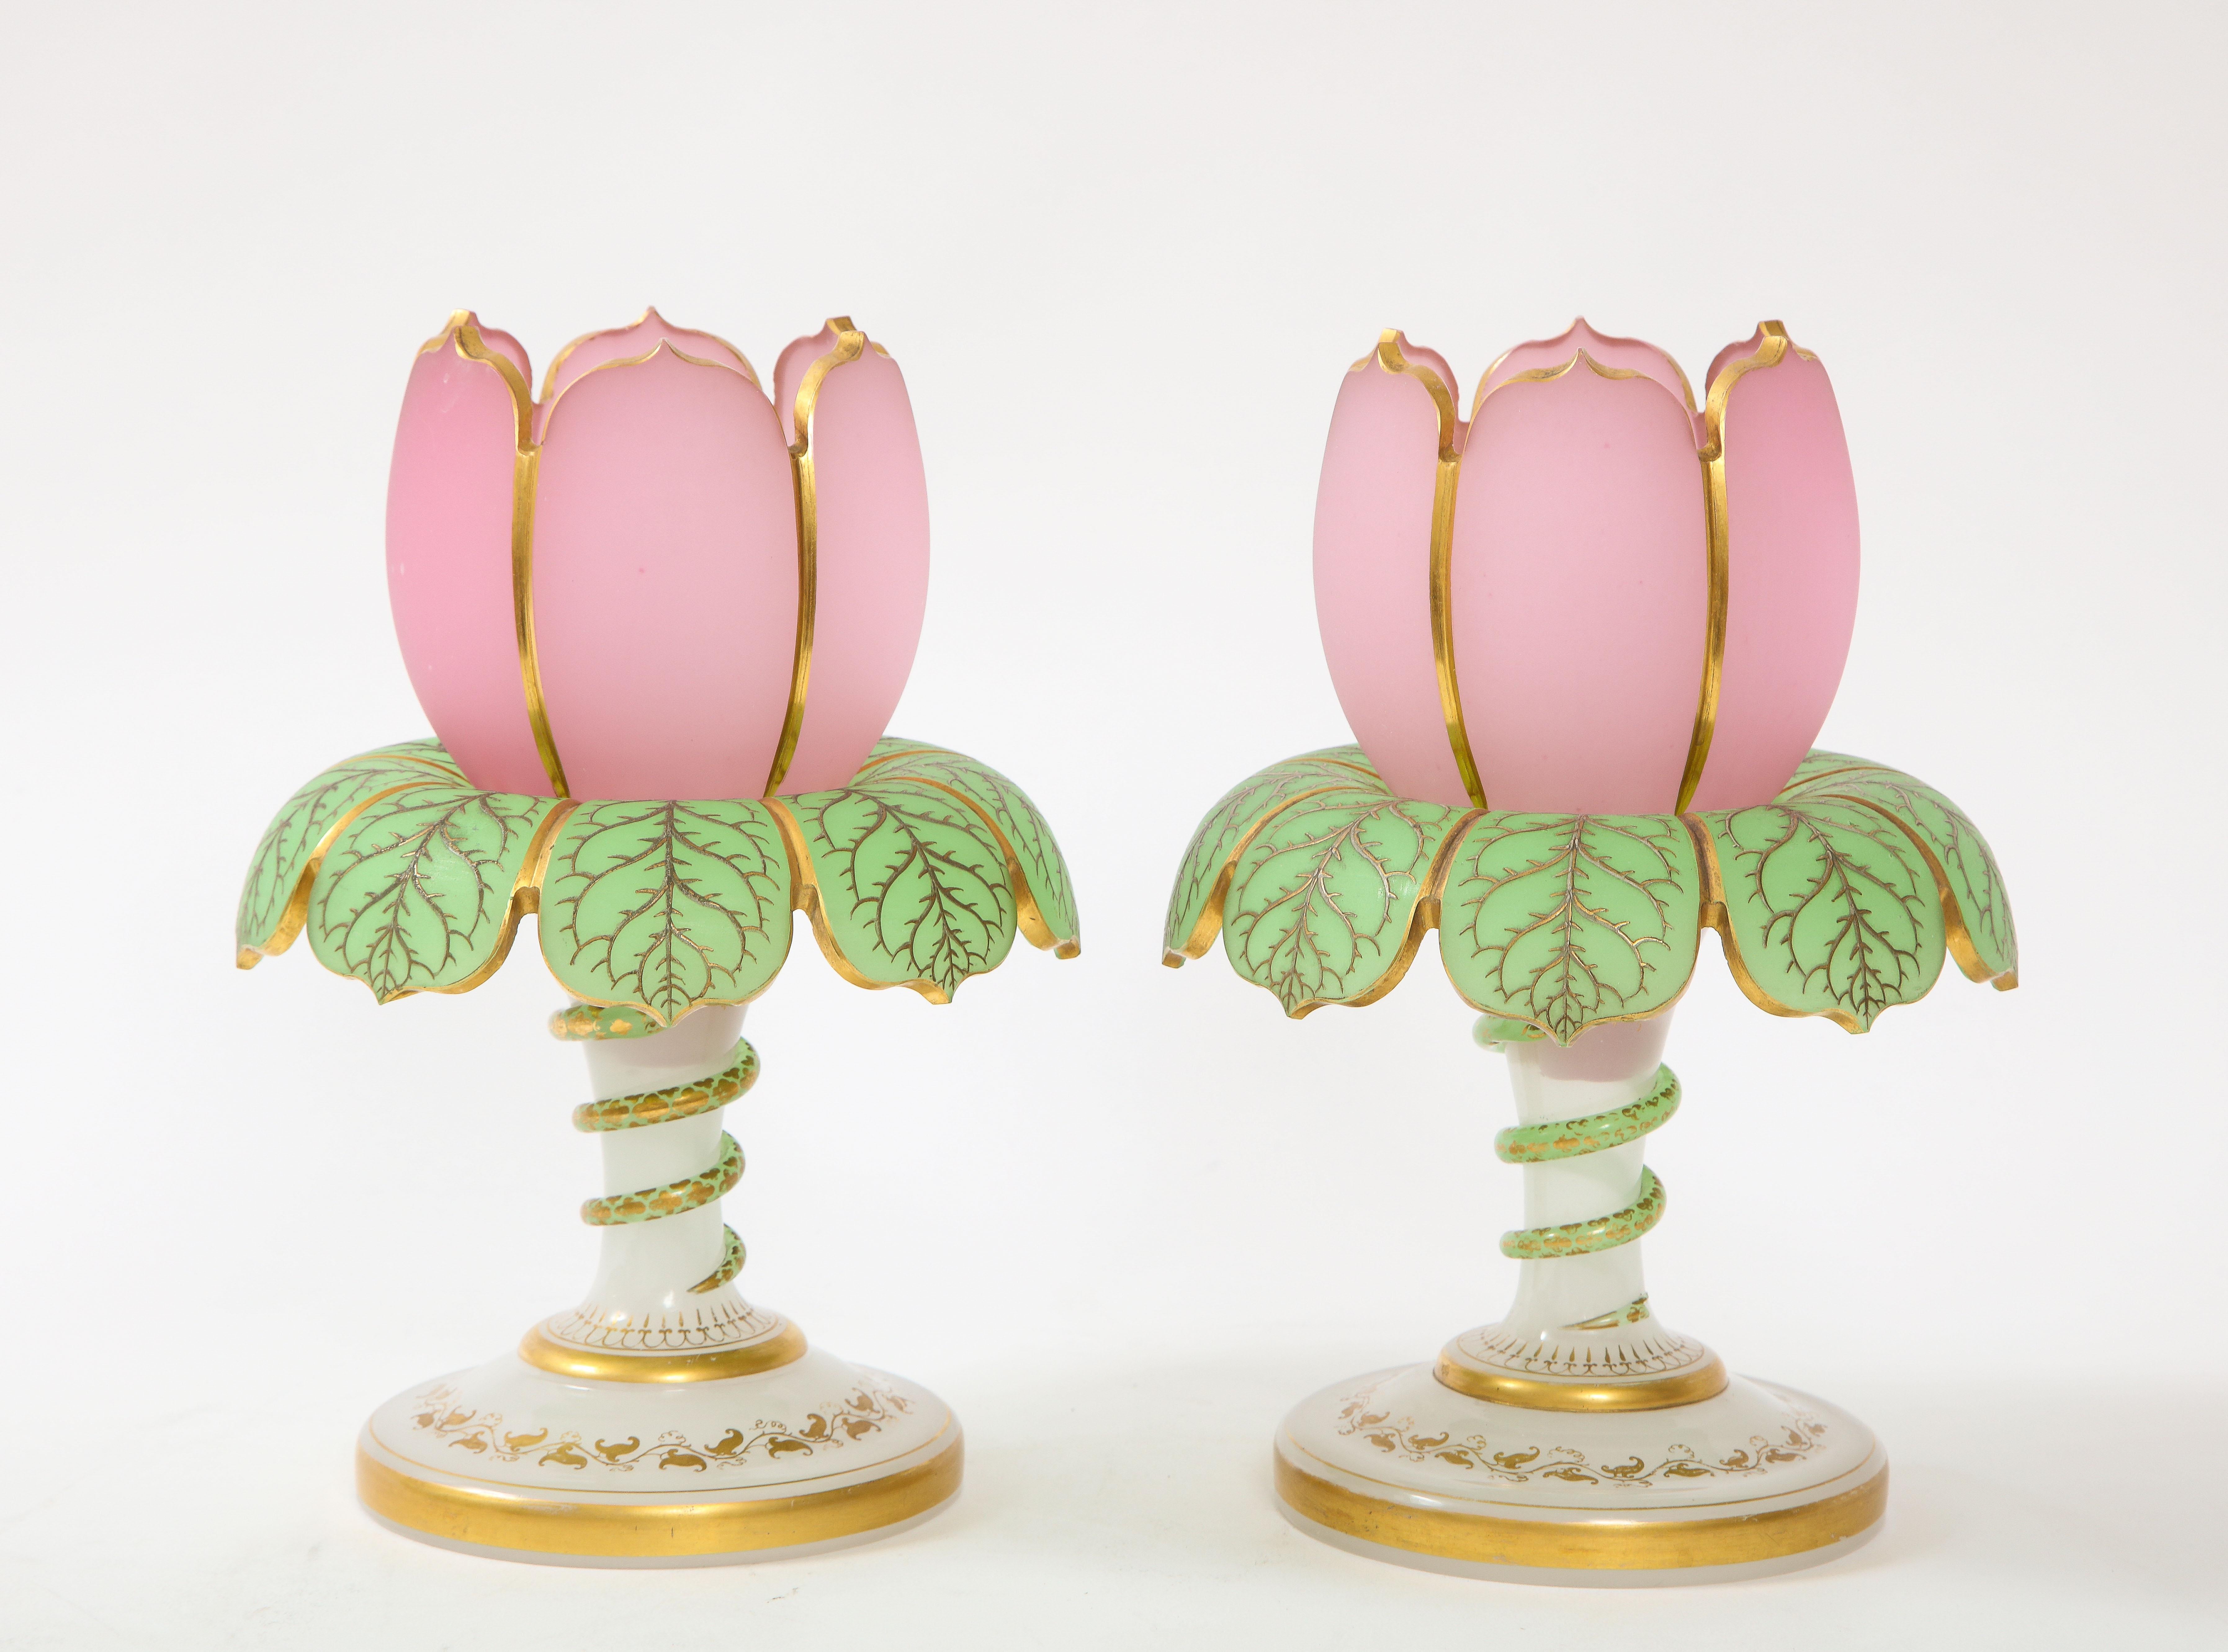 A fabulous and quite rare fantastic condition pair of 19th century baccarat tulip form 3 color opaline vases/ candle holders with serpent decor. The tops of each of the vases are made of pink opaline Baccarat crystal and are finished in 24K brushed